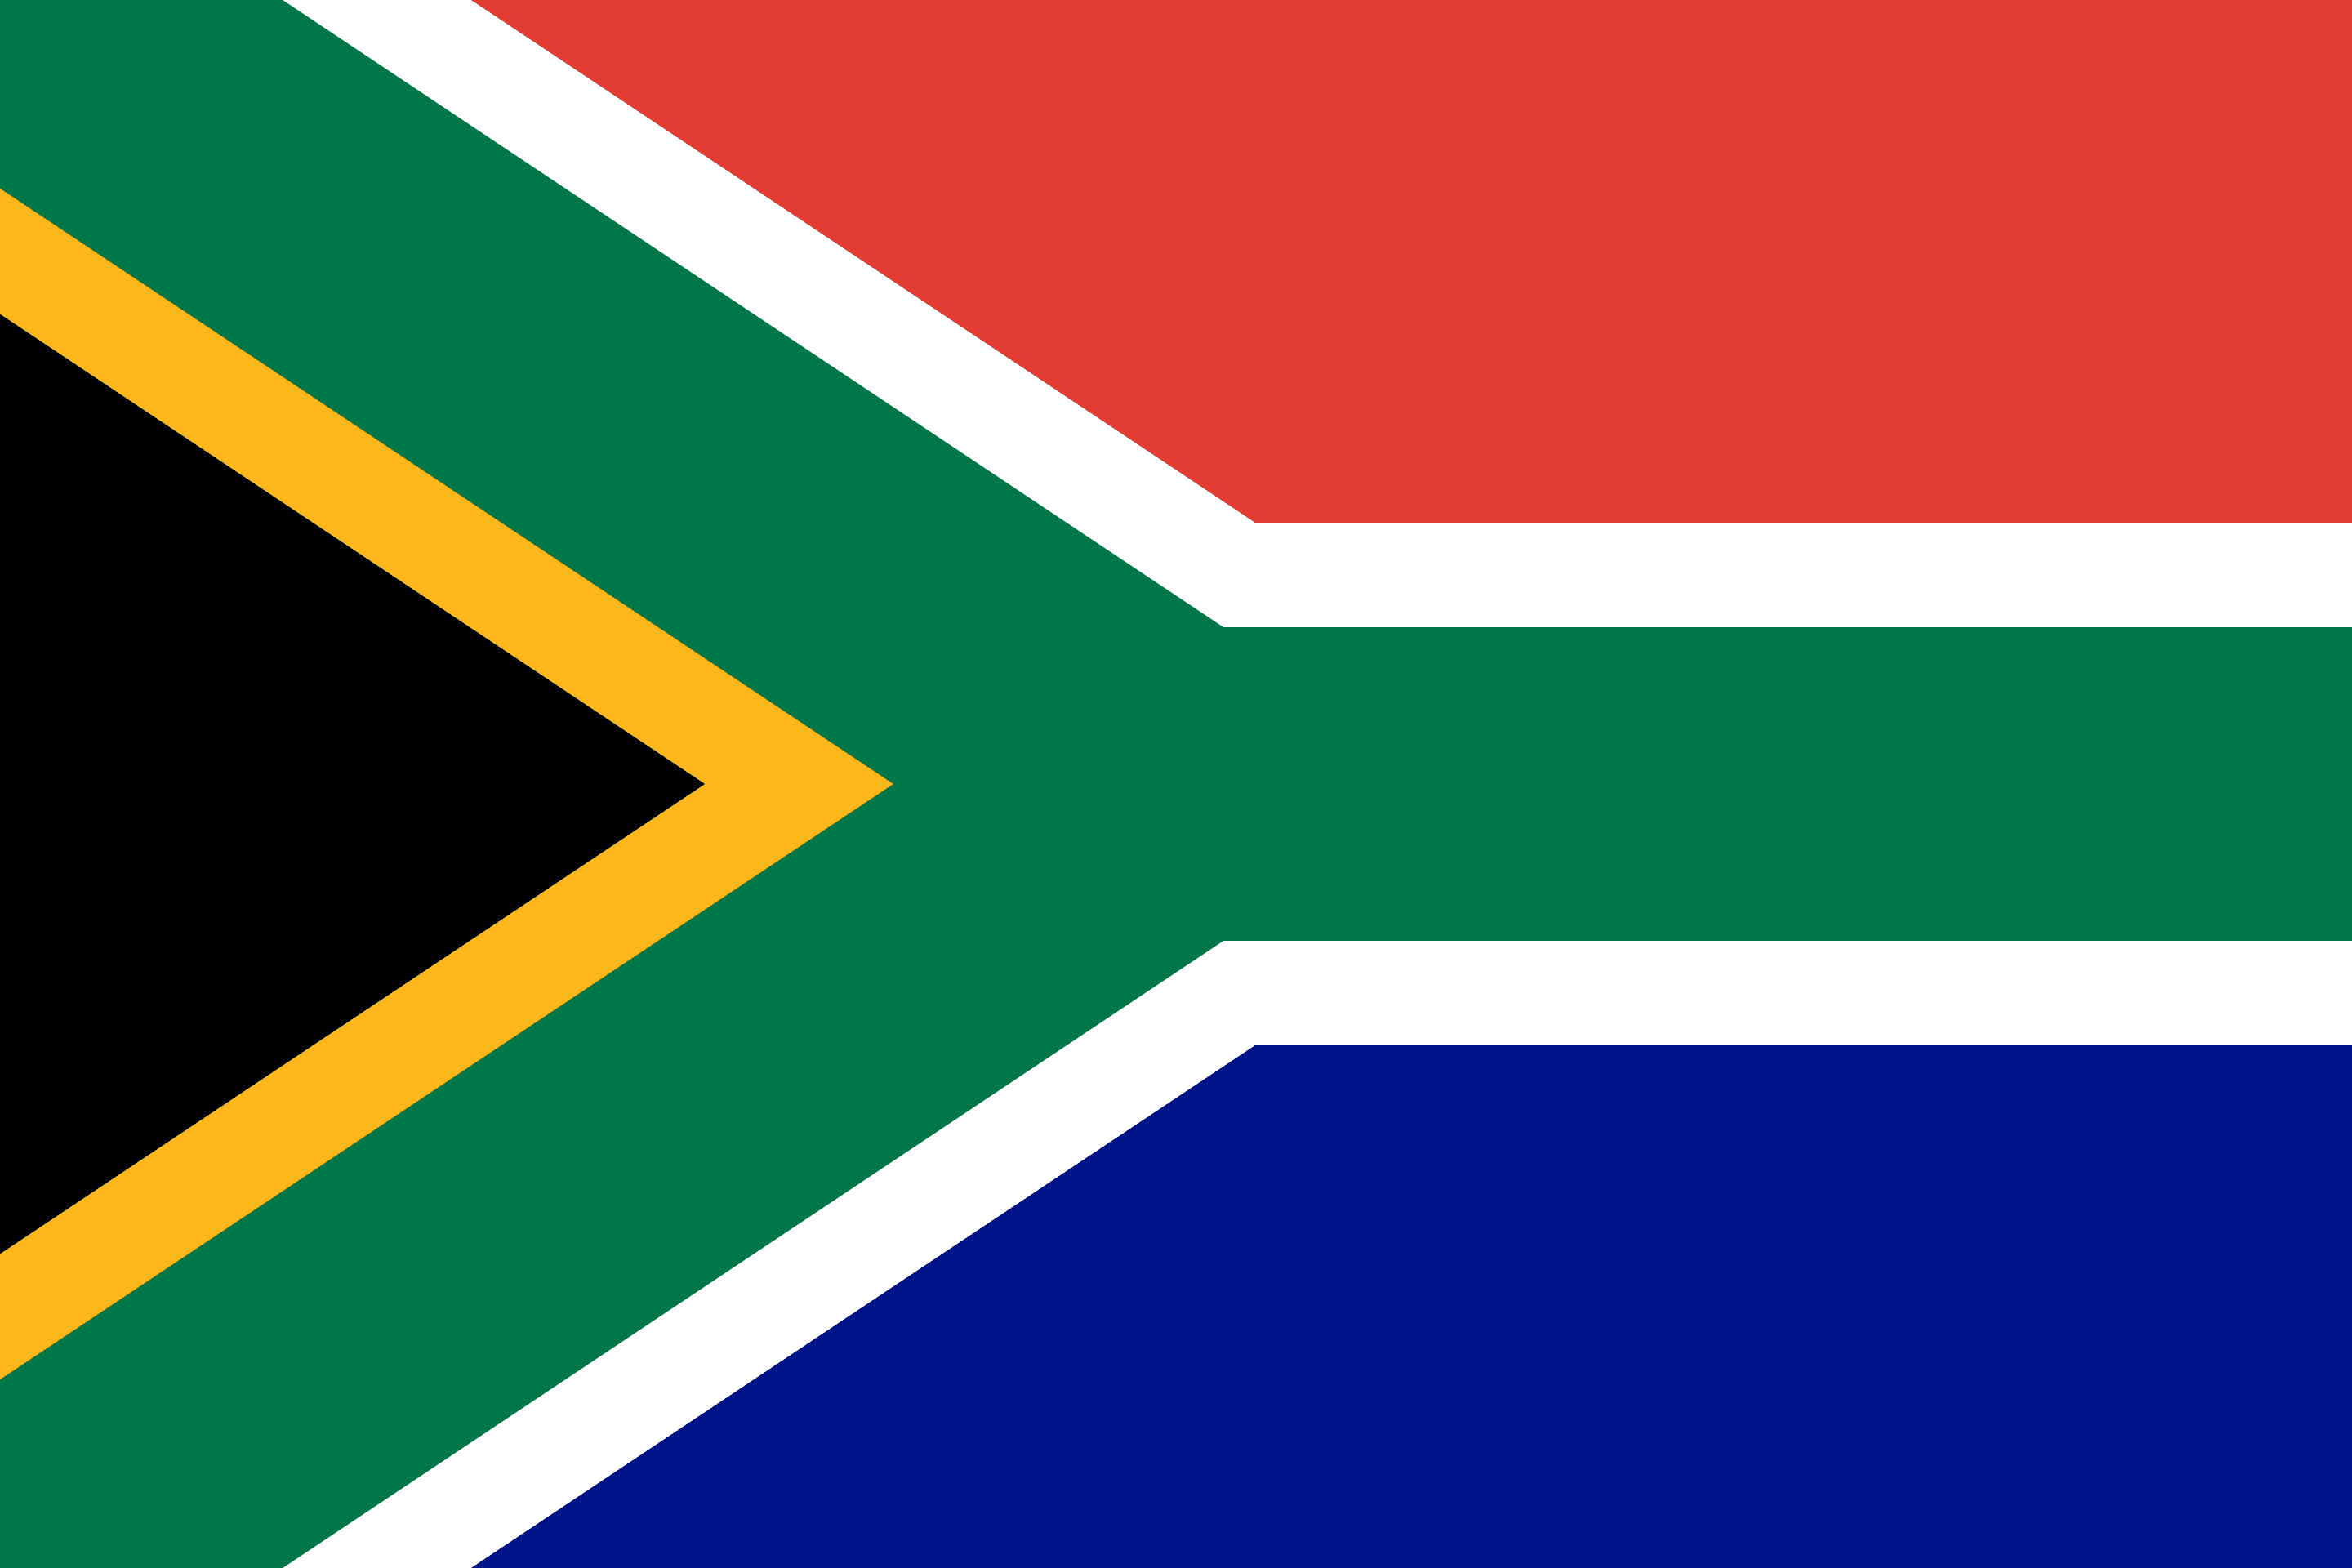 Facts about South Africa